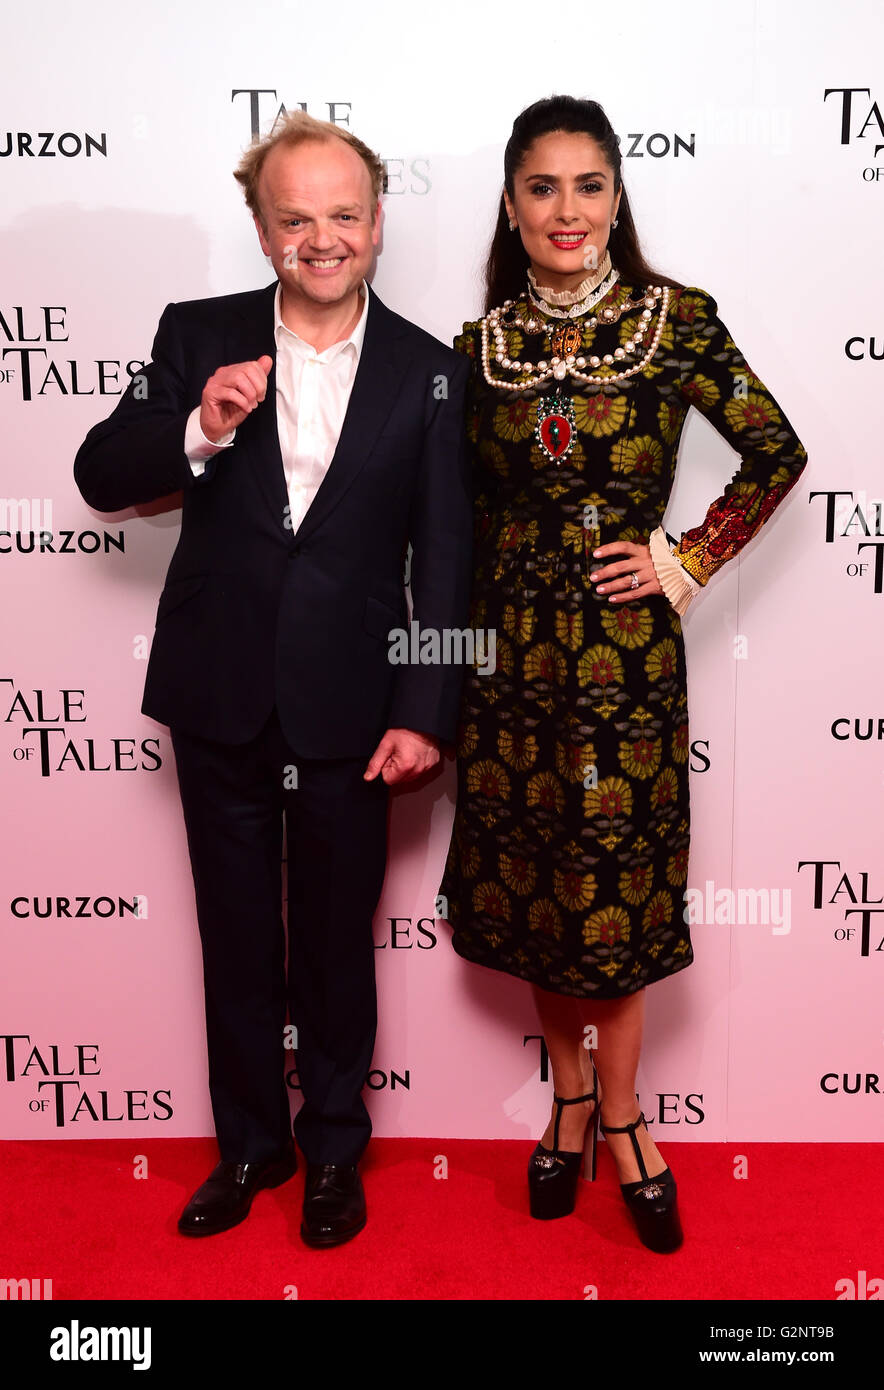 Toby Jones and Salma Hayek attending the UK premiere of 'Tale Of Tales'  held at the Curzon Mayfair, London. PRESS ASSOCIATION Photo. Picture date:  Wednesday 1st June 2016. Photo credit should read: